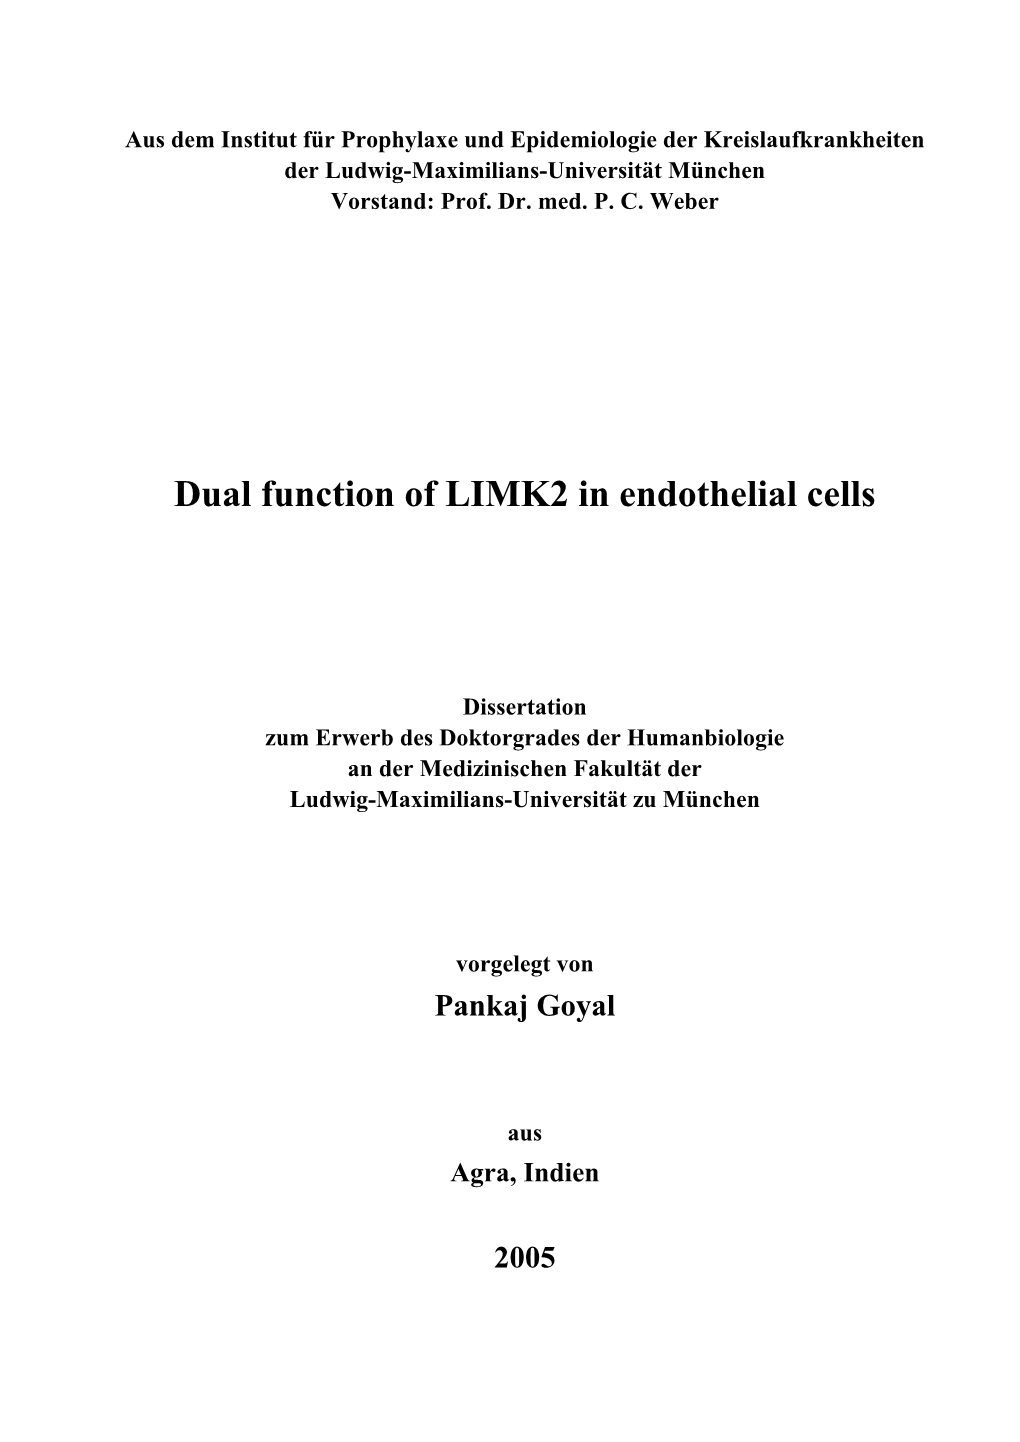 Dual Function of LIMK2 in Endothelial Cells